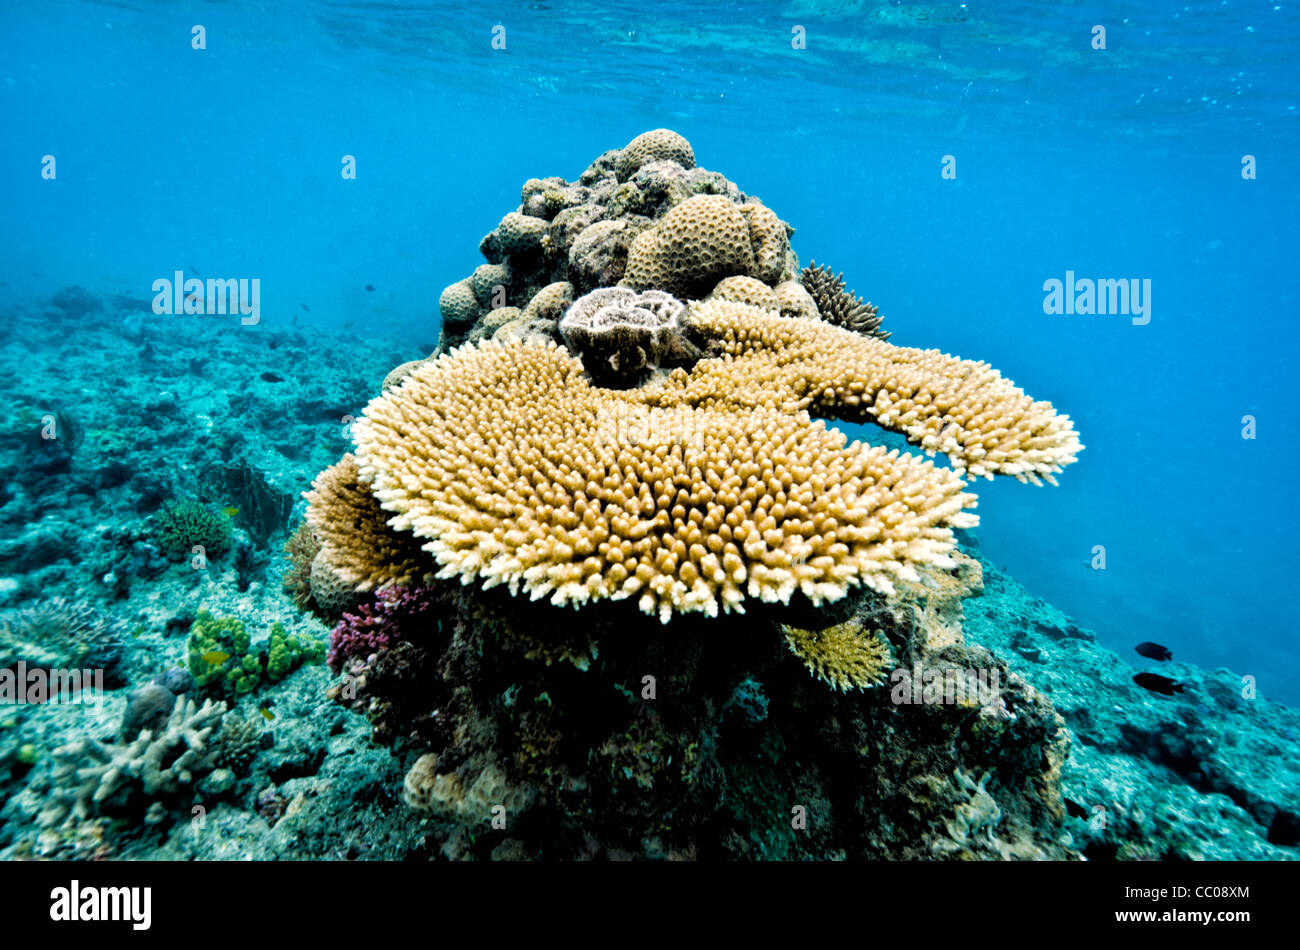 An underwater shot of some of the plate coral in shallow waters at Swains Reef on Australia's Great Barrier Reef. Stock Photo